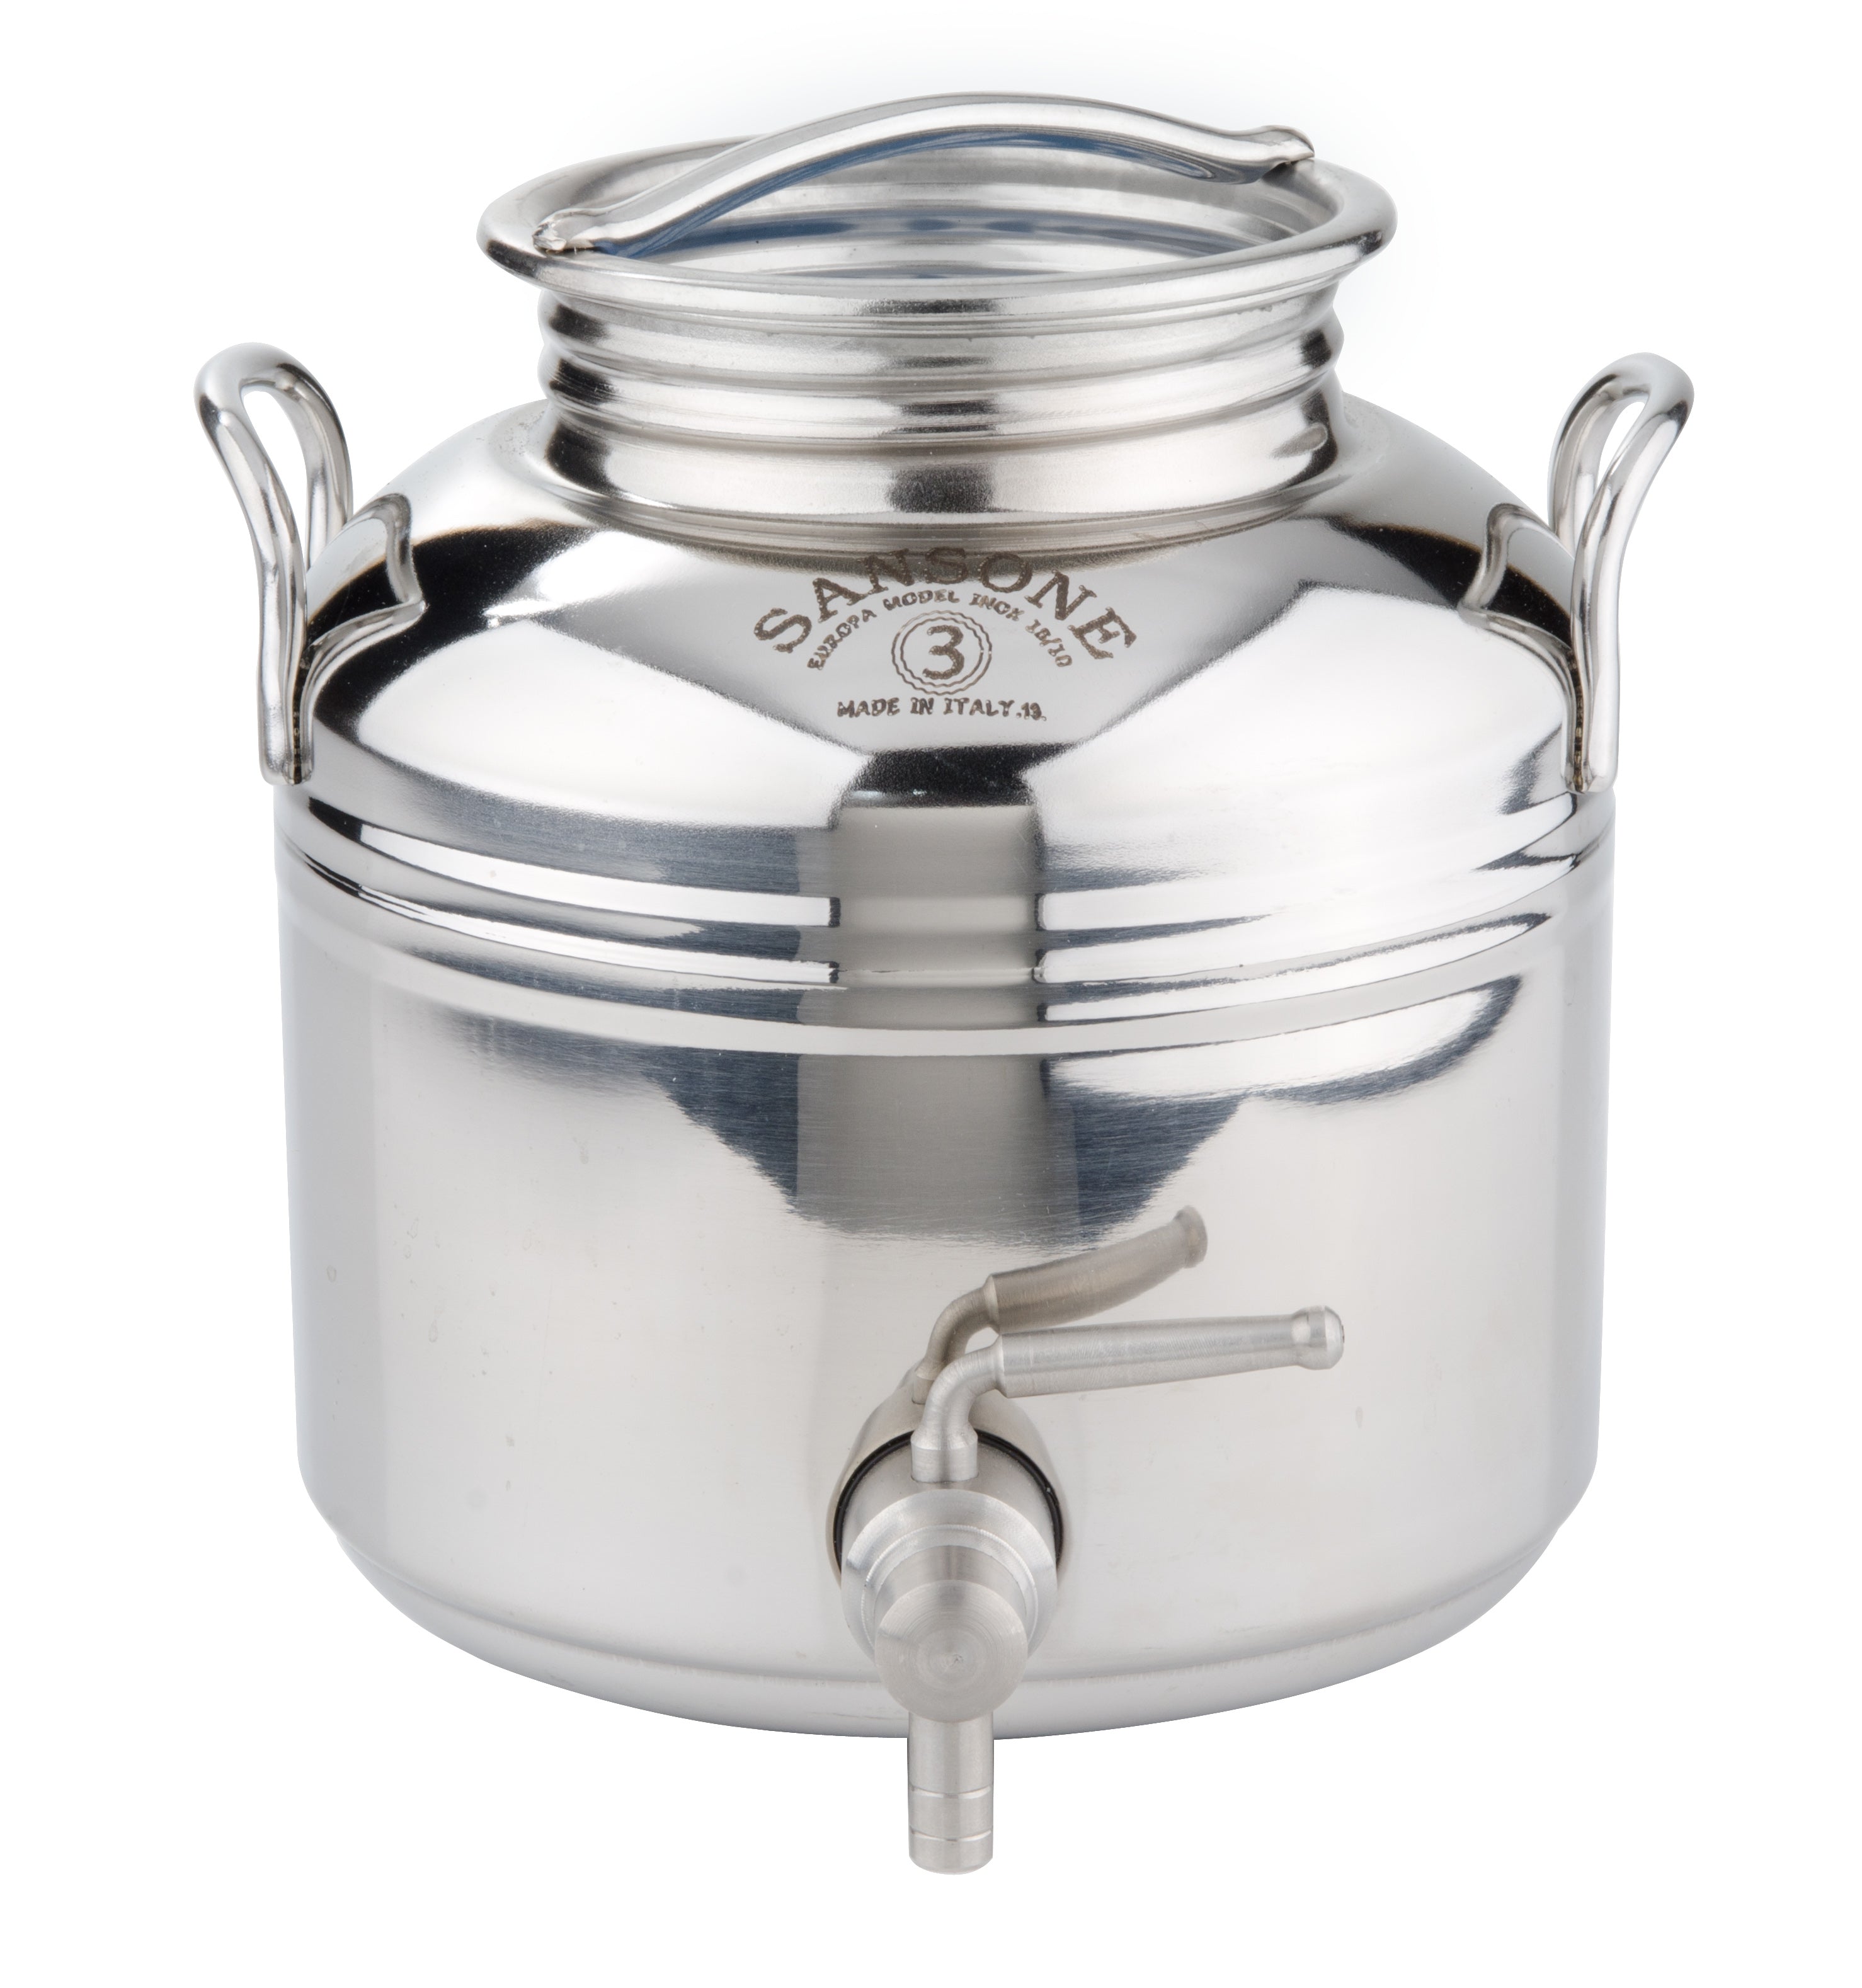 STAINLESS STEEL OLIVE OIL DISPENSER - Mabrook Hotel Supplies